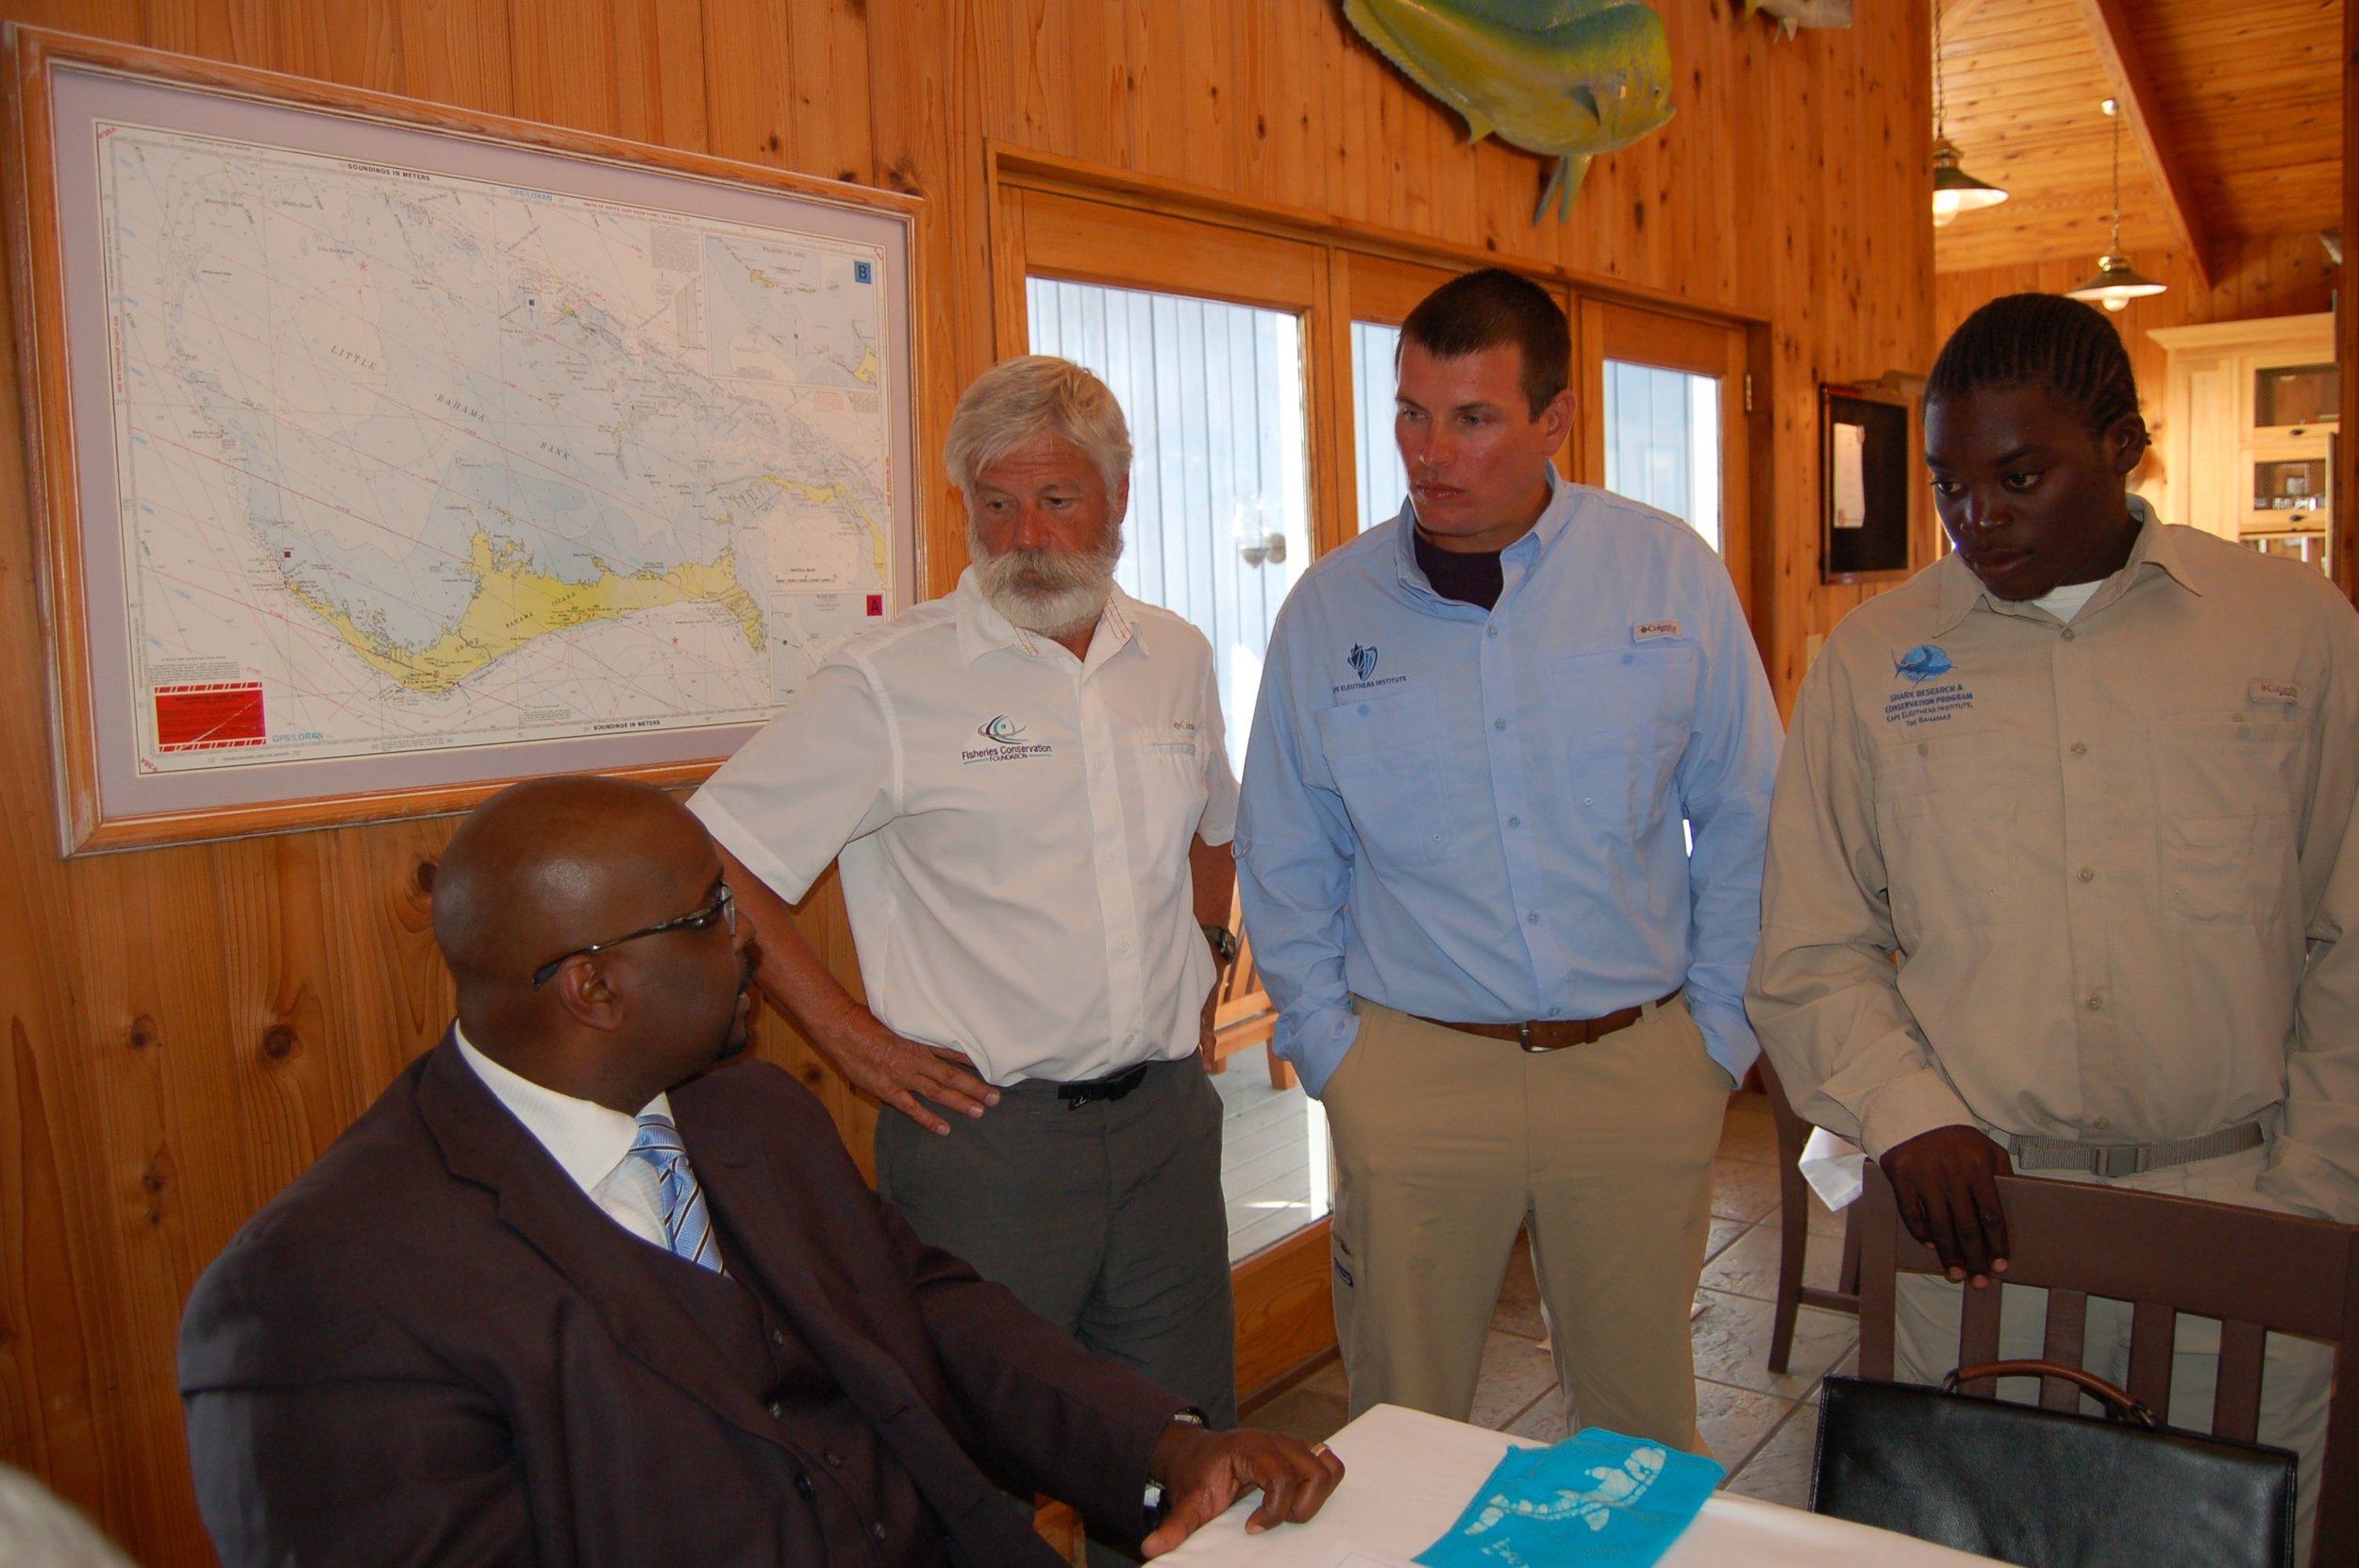 Aaron Shultz, David Philipp, and Malcolm Goodwin with the Prime Minister of the Bahamas